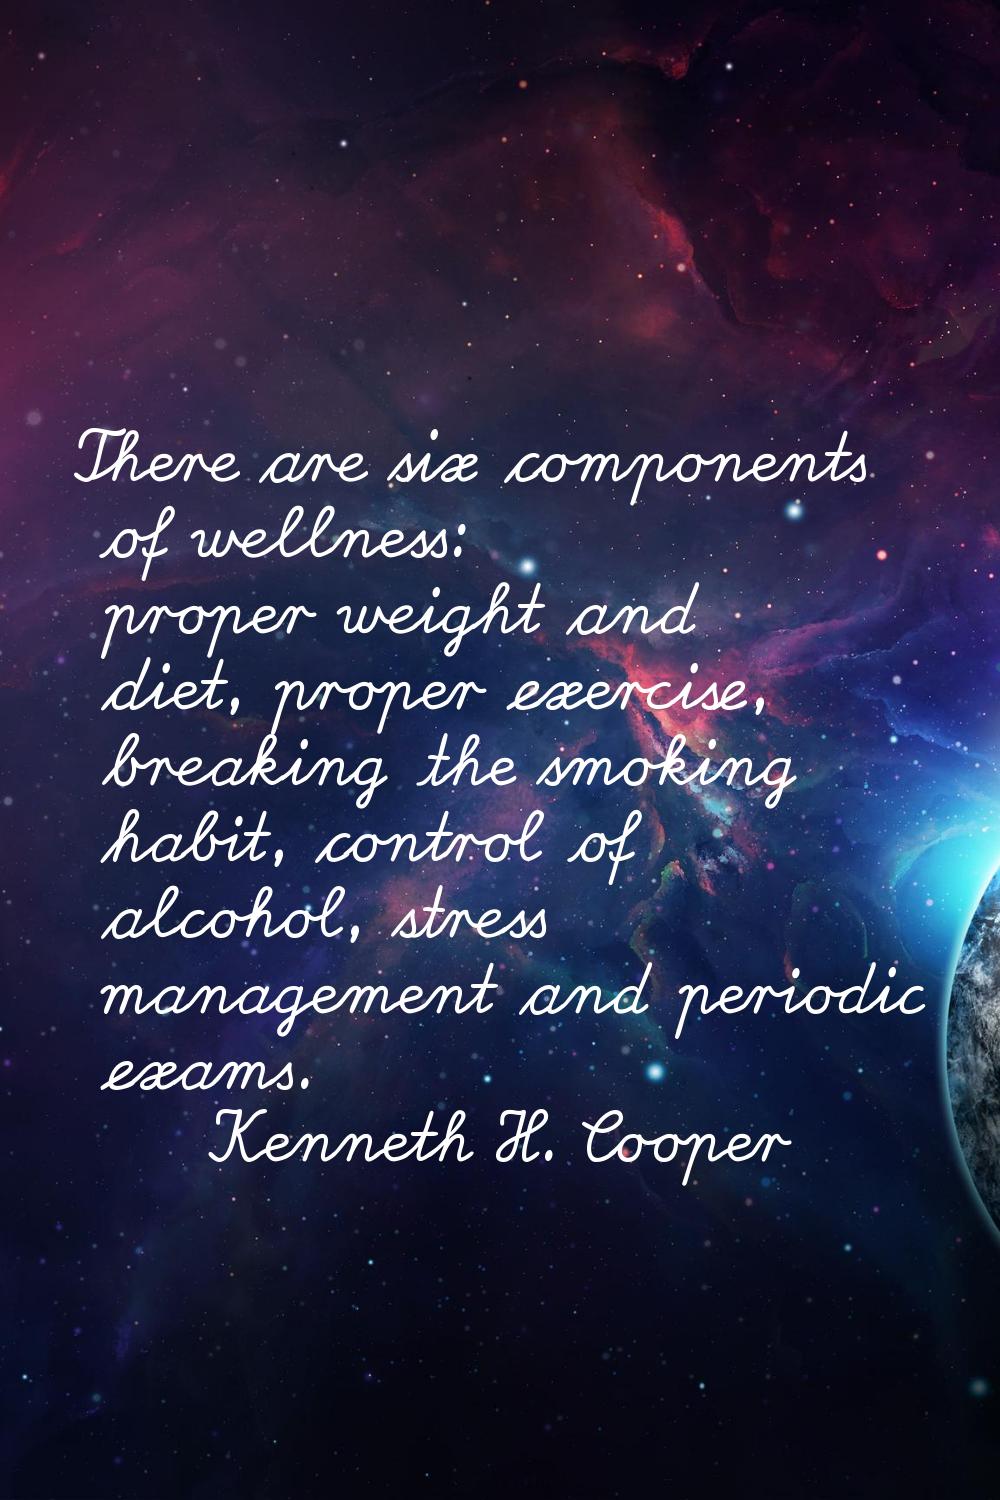 There are six components of wellness: proper weight and diet, proper exercise, breaking the smoking